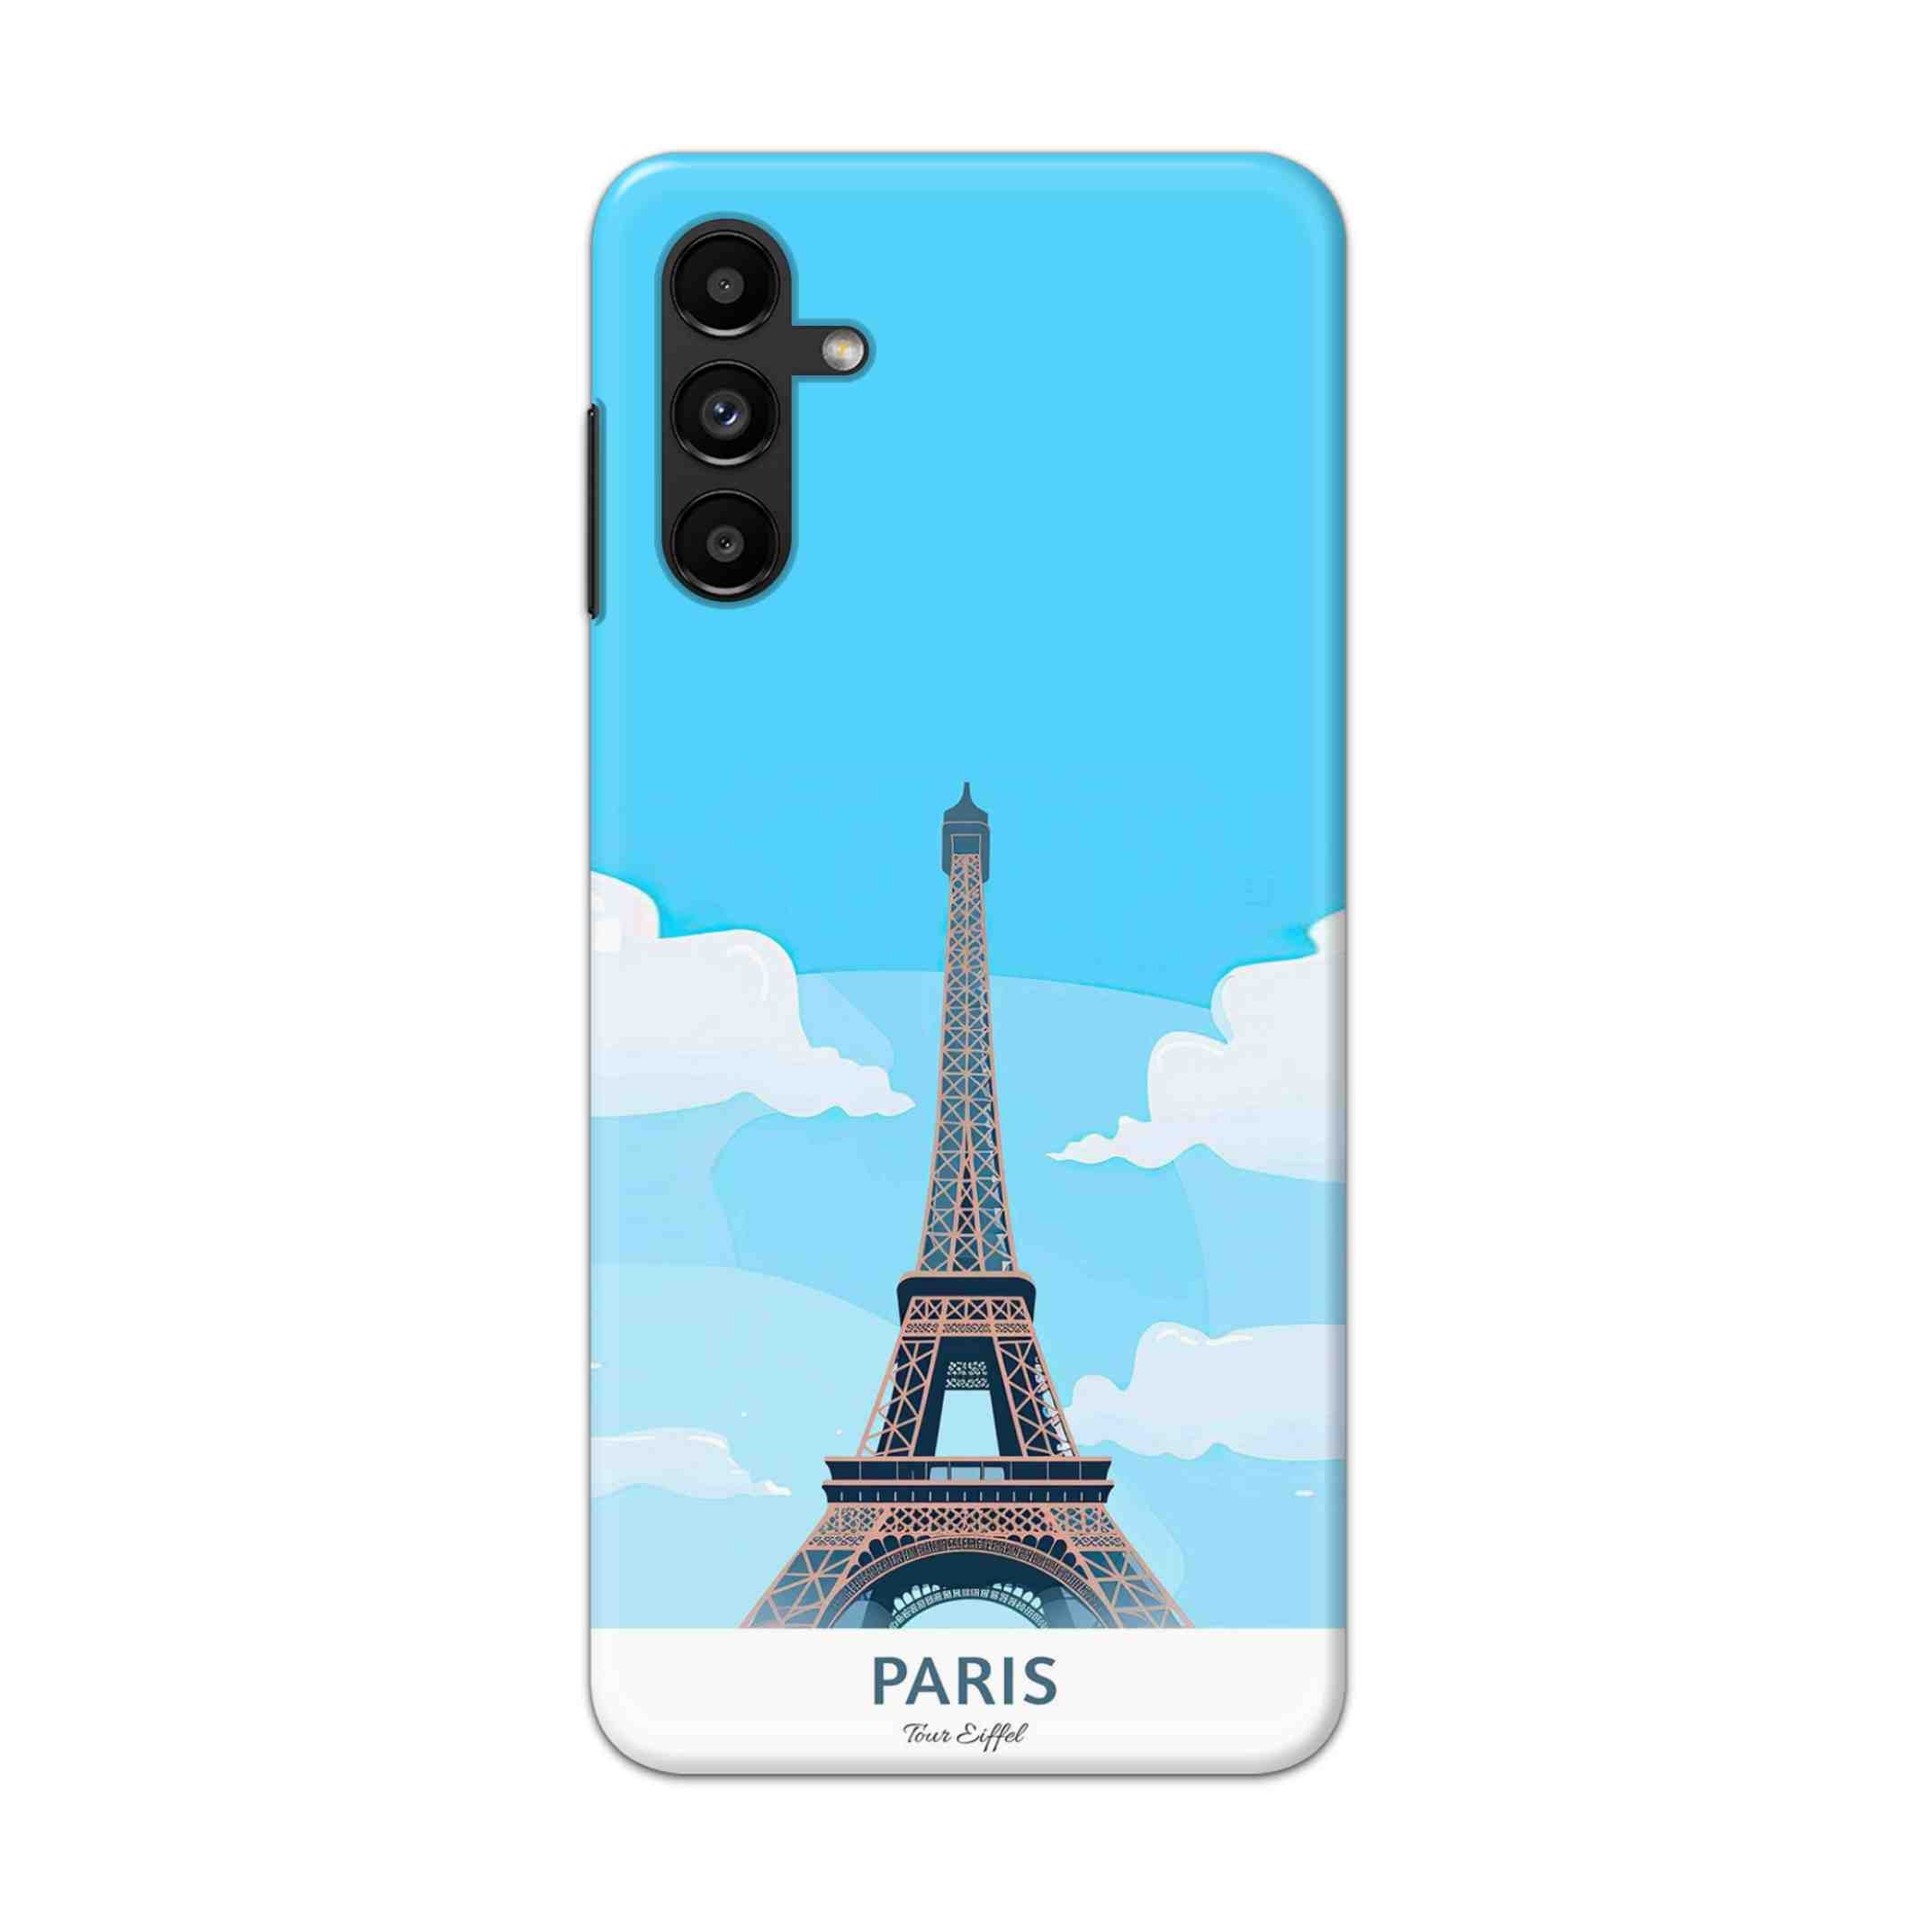 Buy Paris Hard Back Mobile Phone Case/Cover For Galaxy A13 (5G) Online